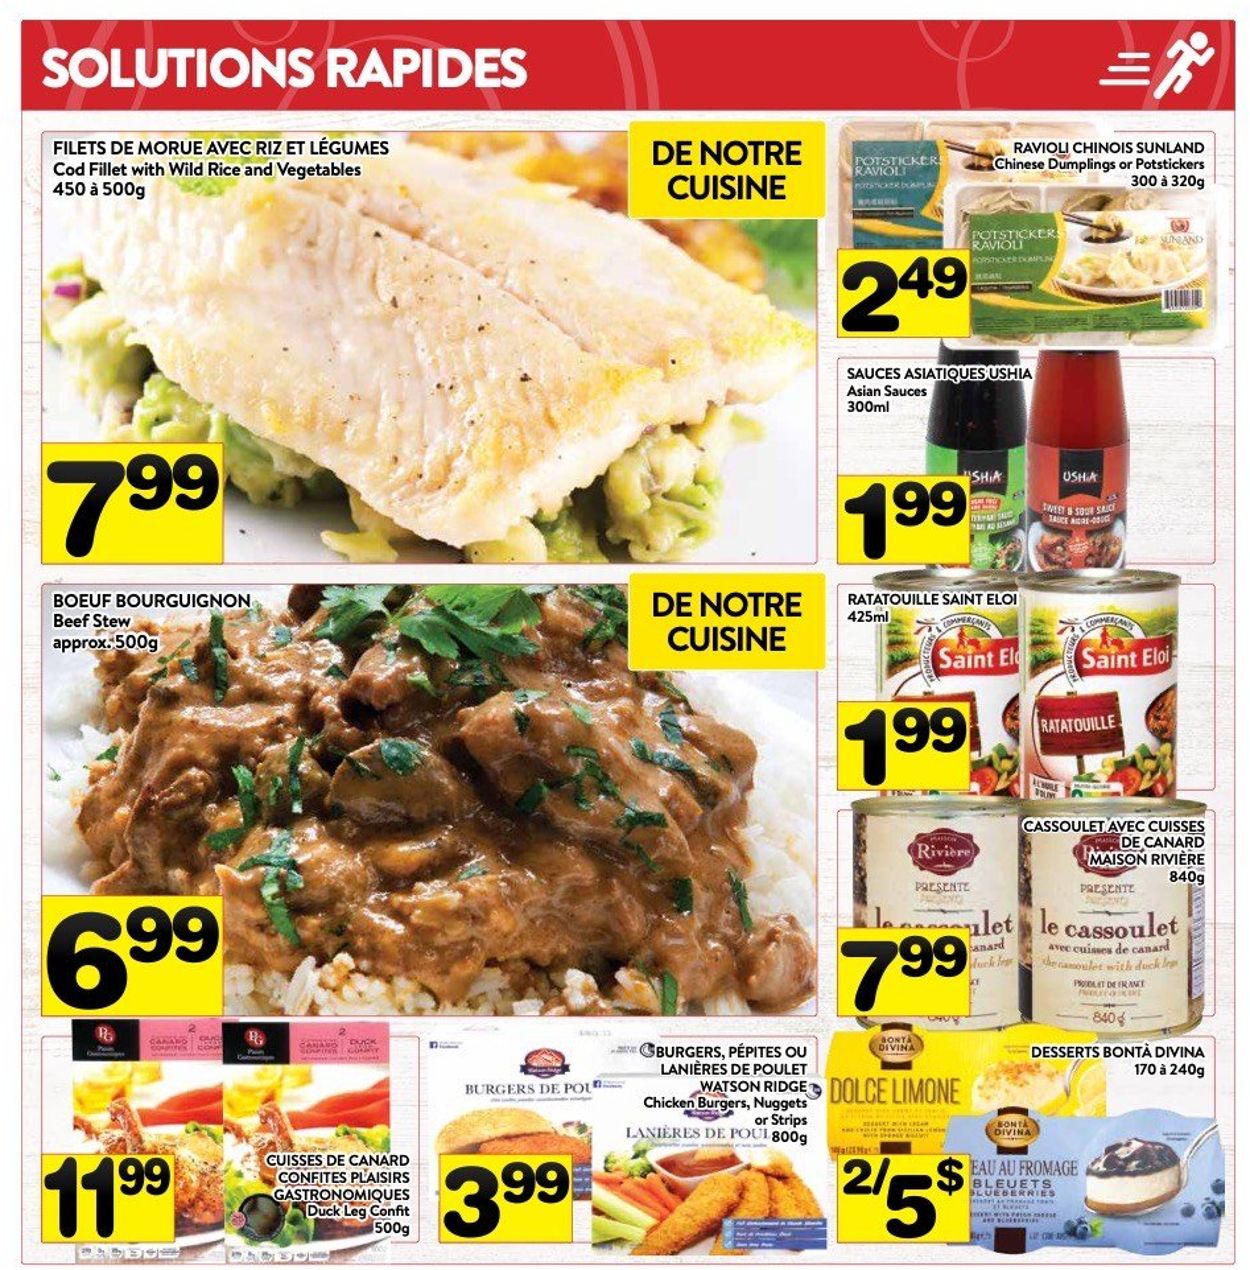 PA Supermarché Flyer from 03/22/2021